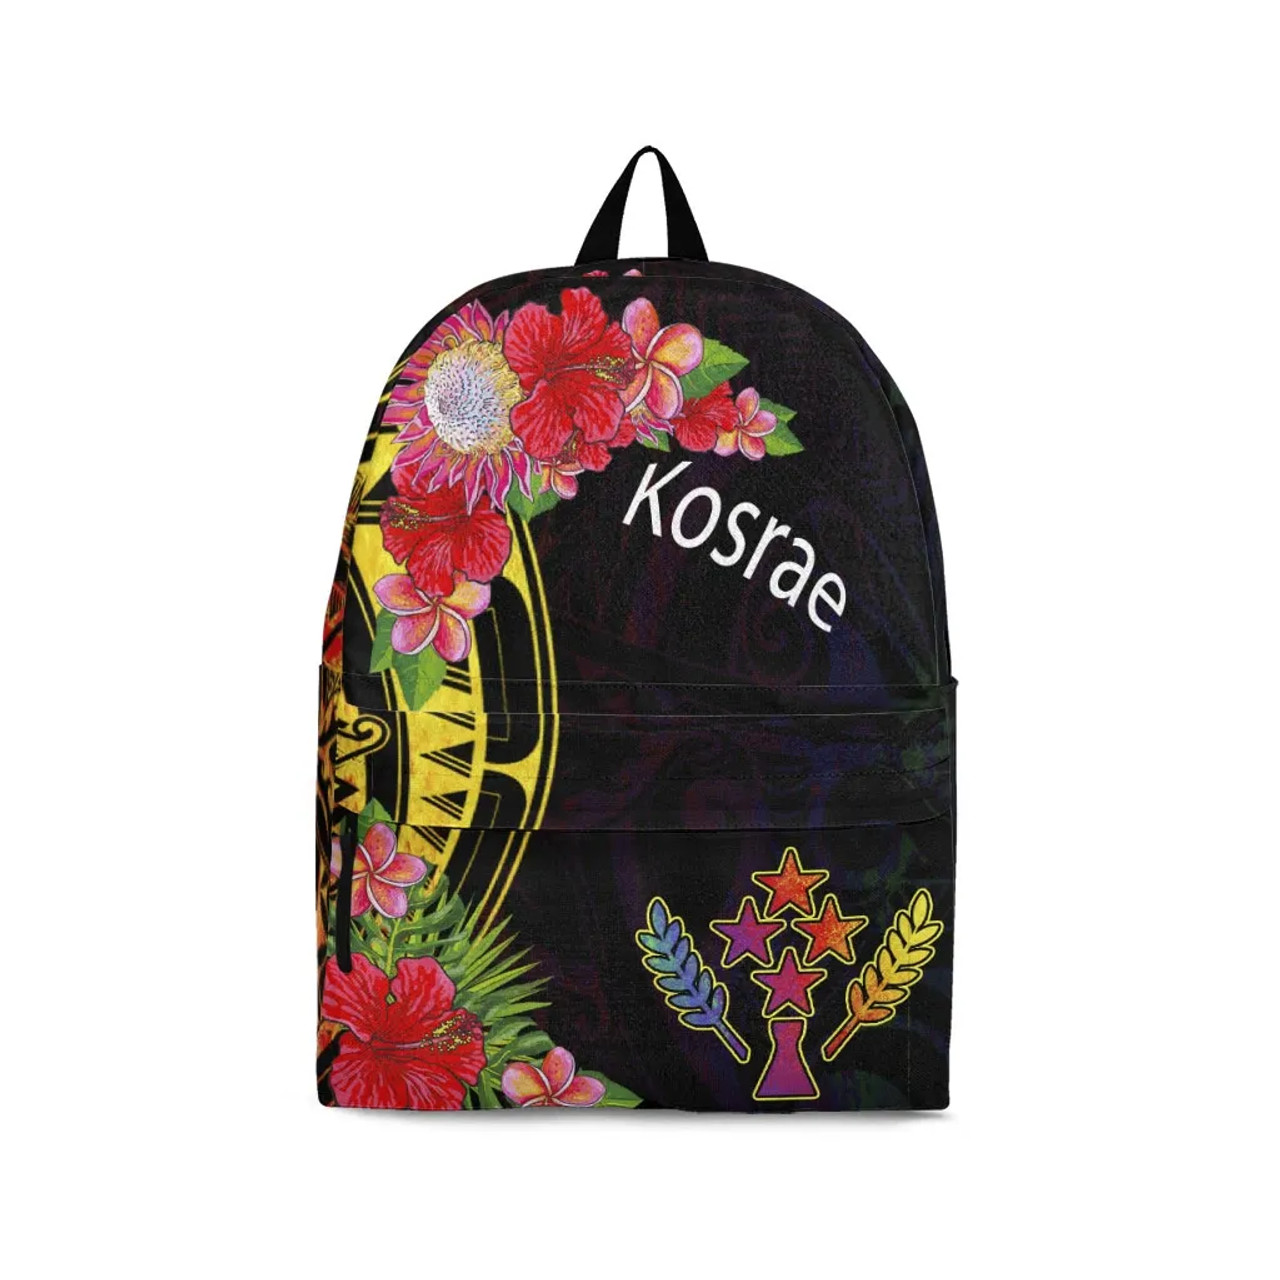 Kosrae State Backpack - Tropical Hippie Style 1